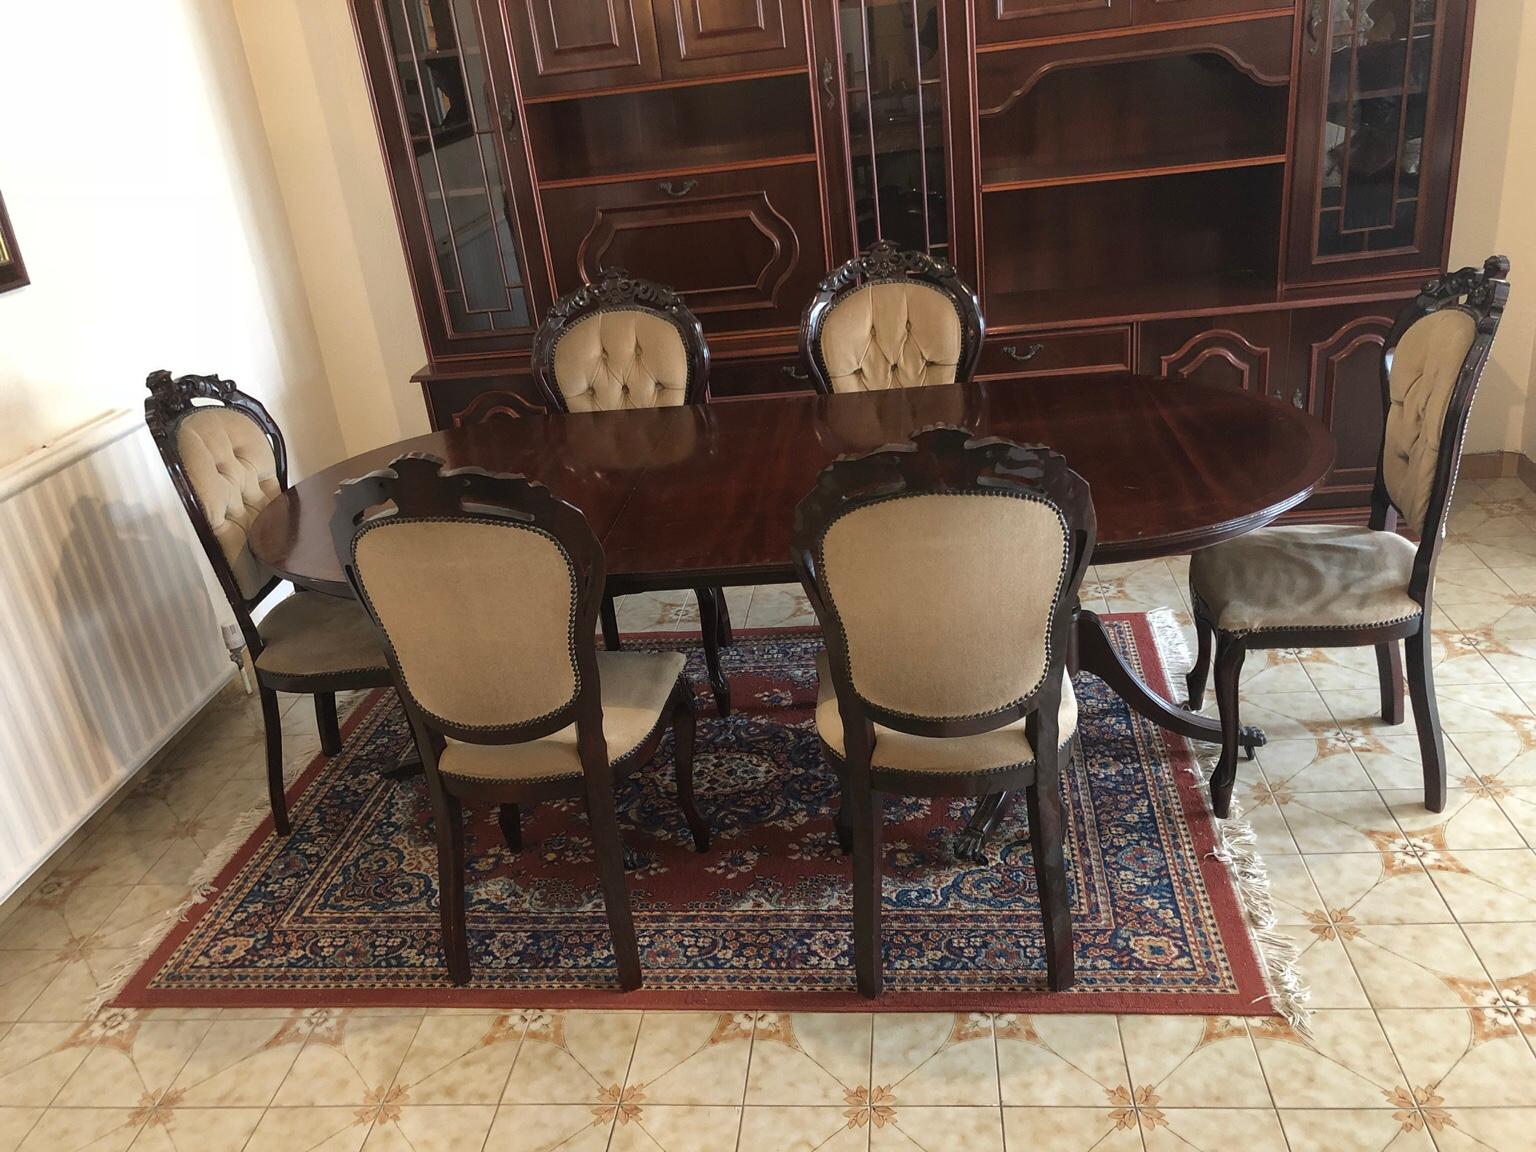 Italian Dining Room Table And 6 Chairs In N13 Enfield Fur 95 00 Zum Verkauf Shpock De